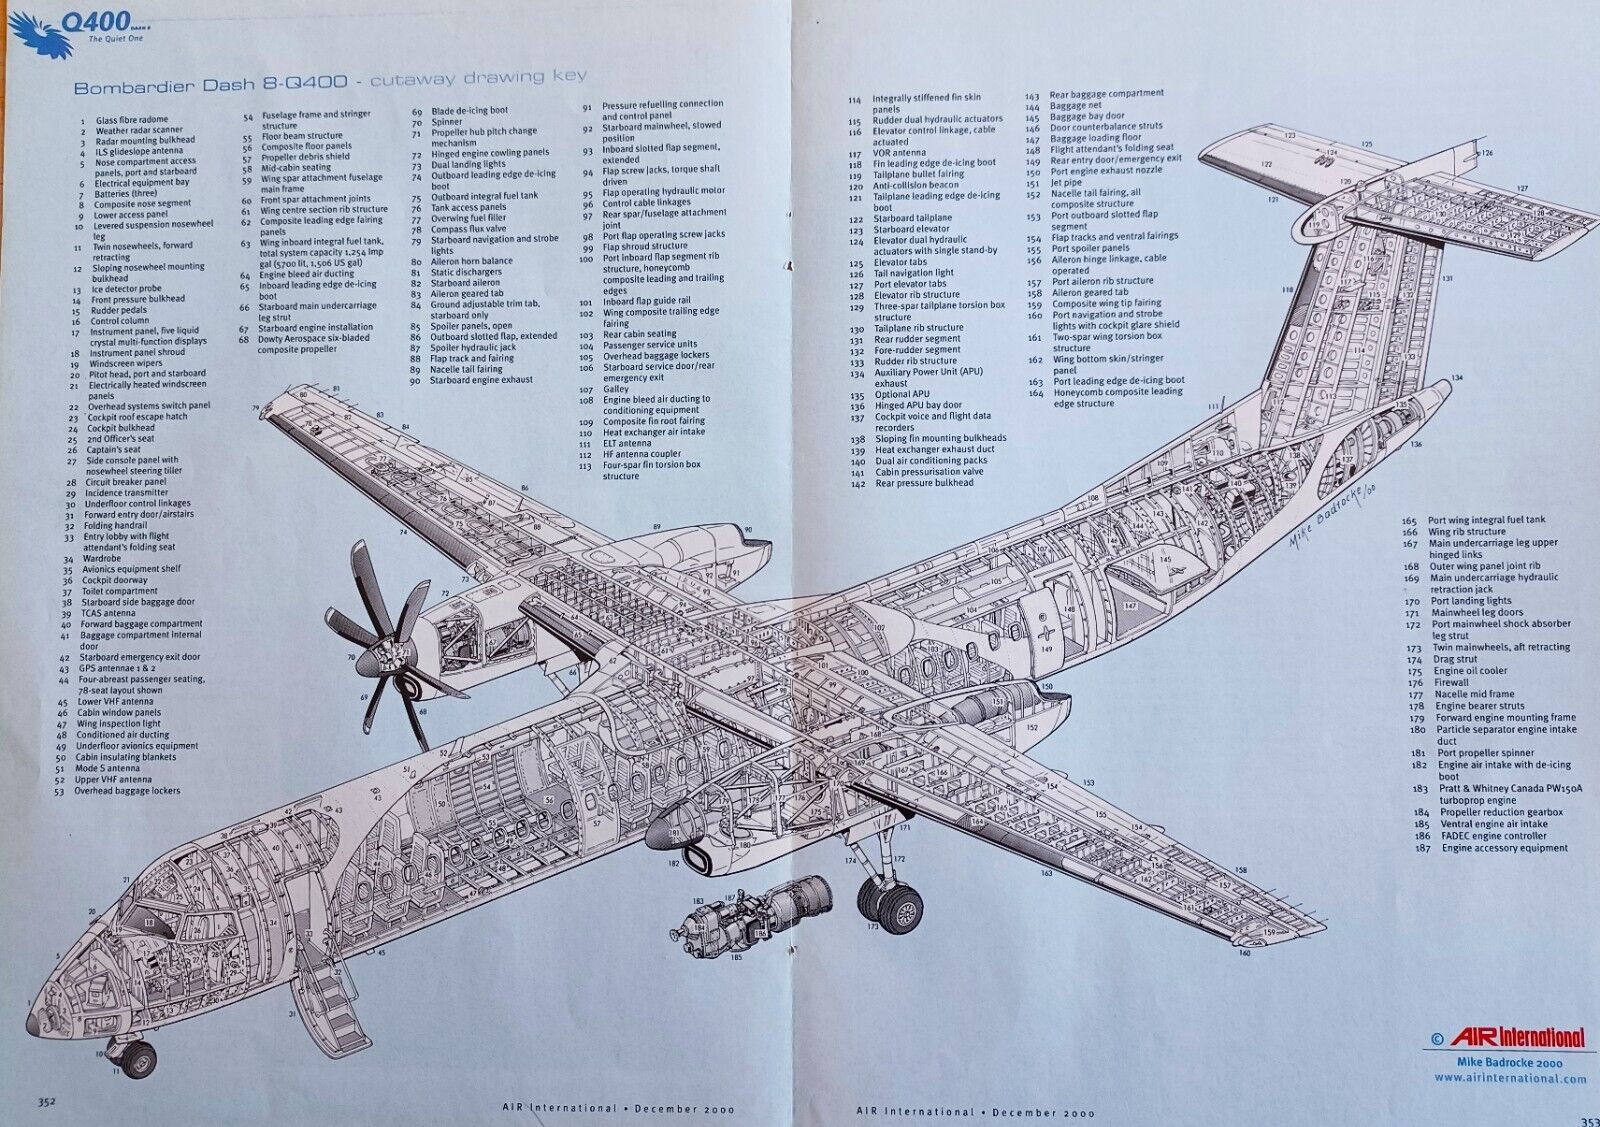 BOMBARDIER DASH 8 Q400 Cutaway photo print, Measures 2 page 8 1/2in x 12.